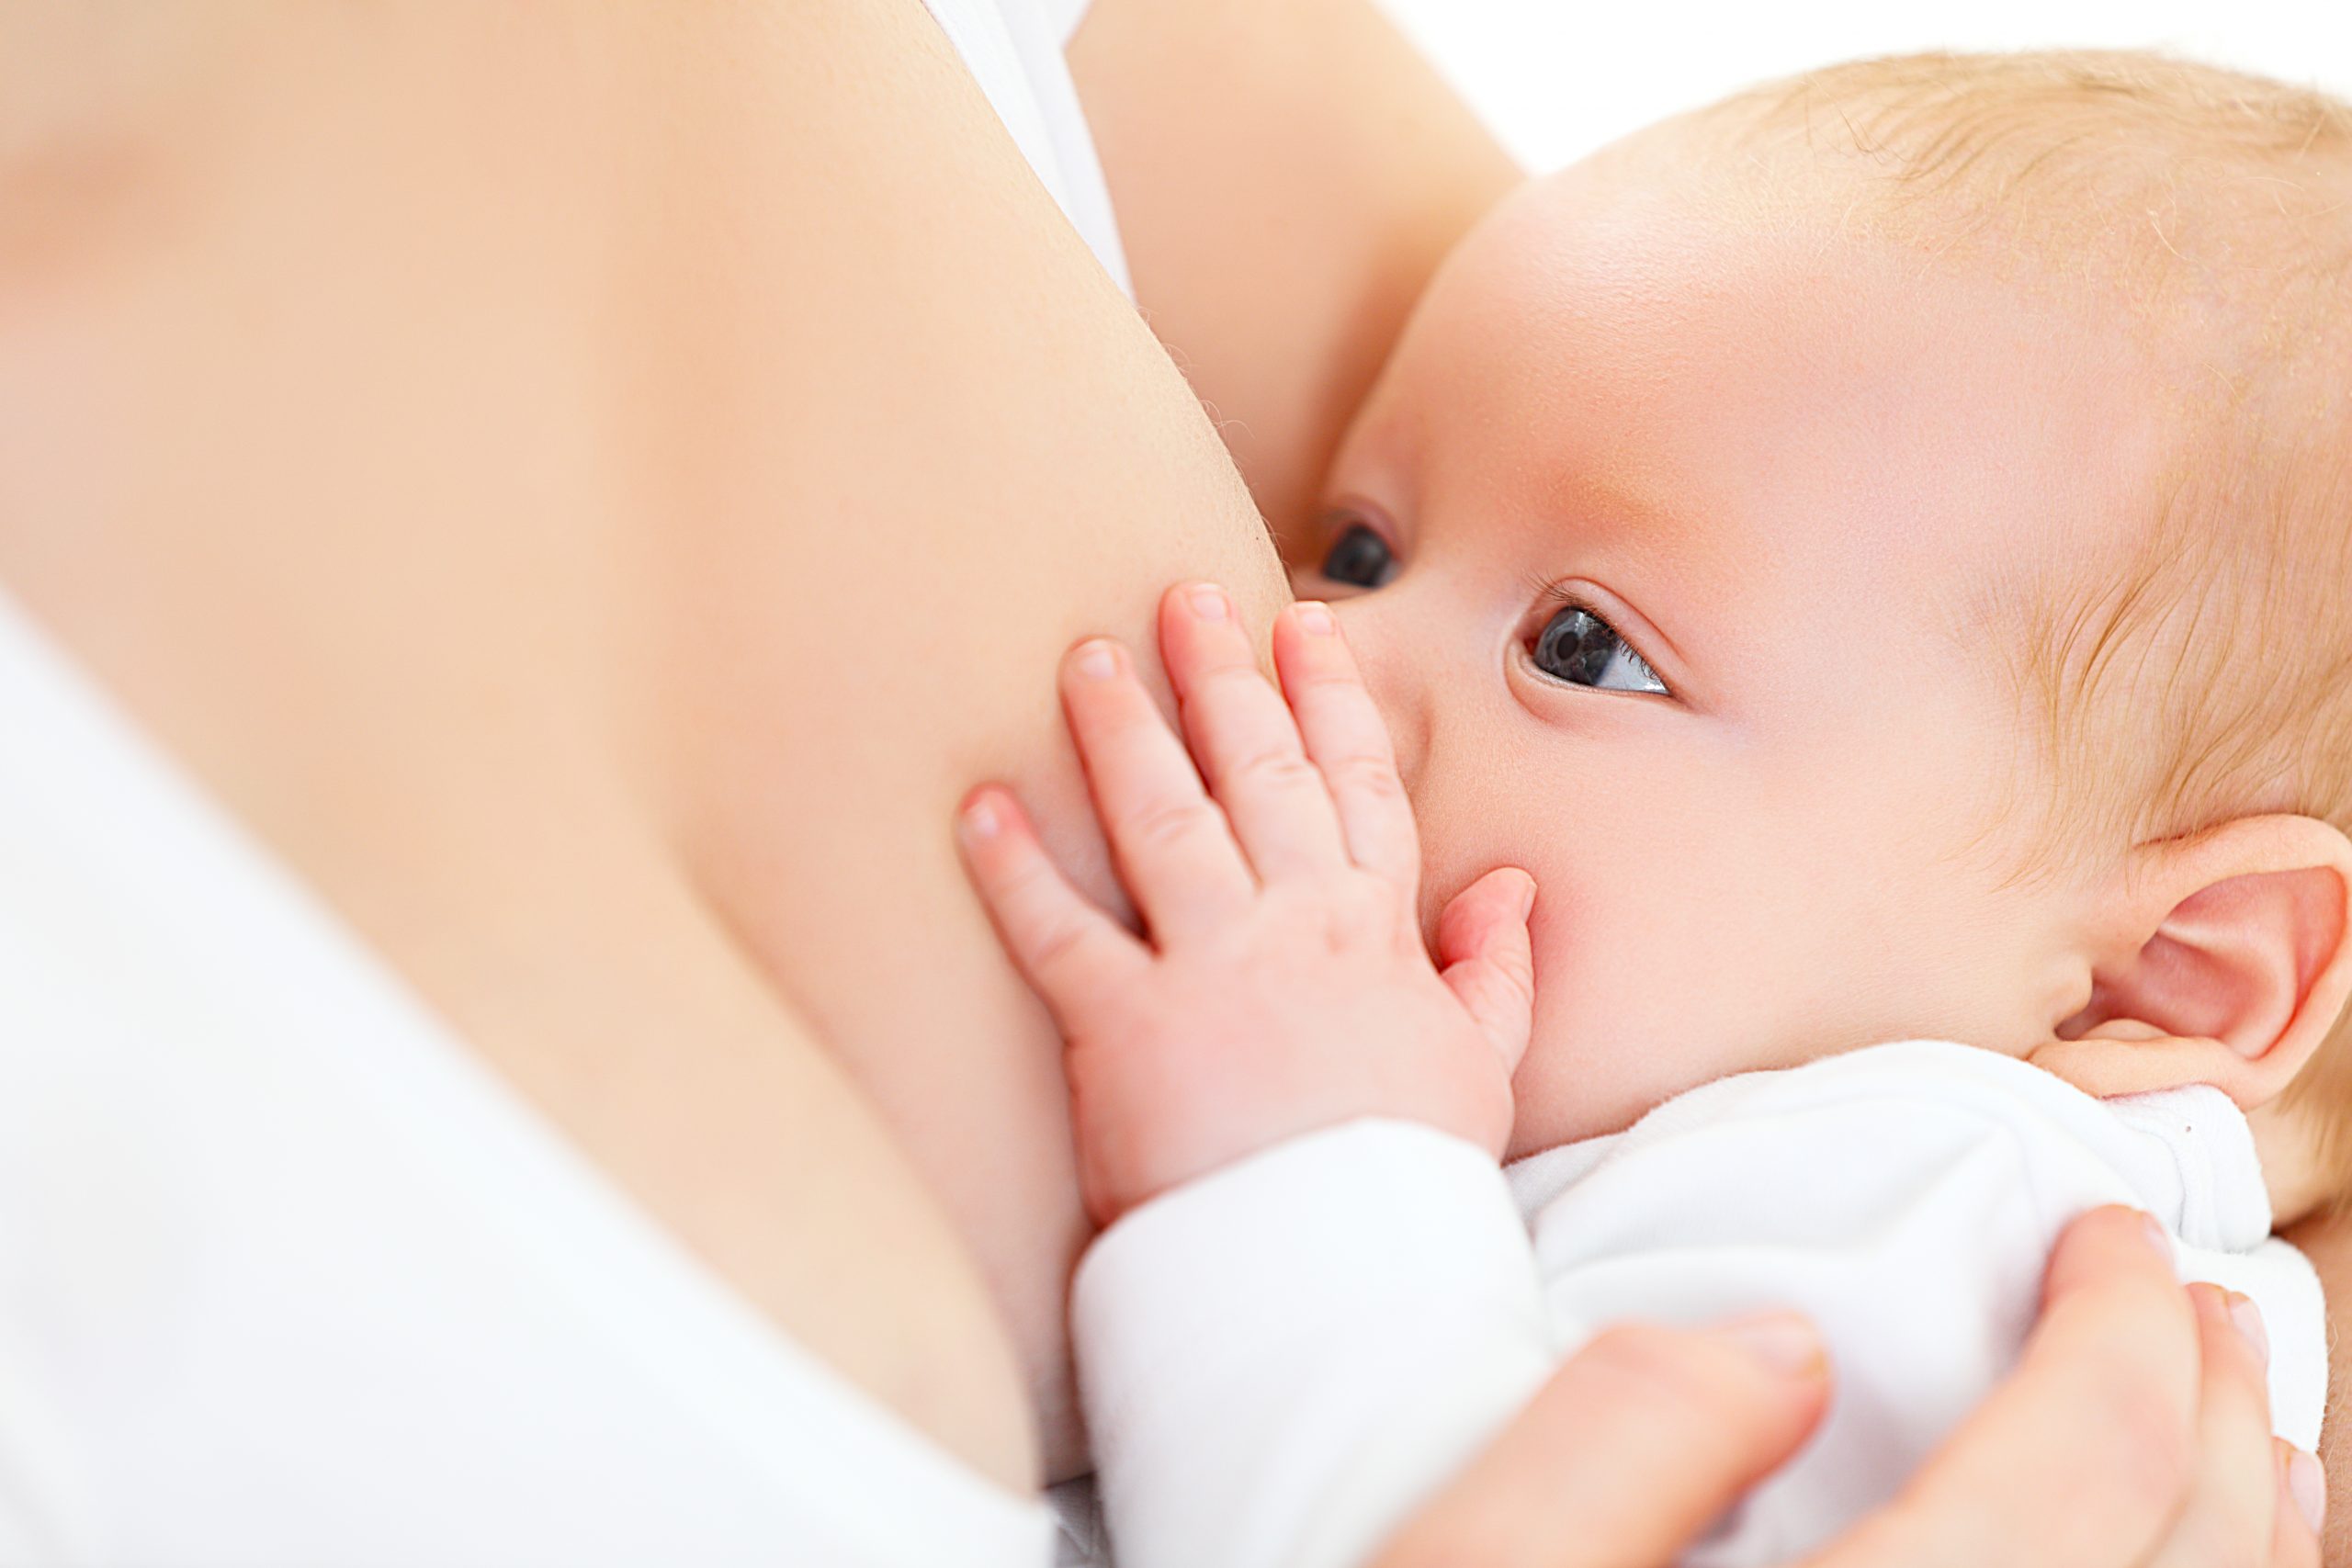 breastfeeding. mother holding newborn baby in an embrace and breastfeed